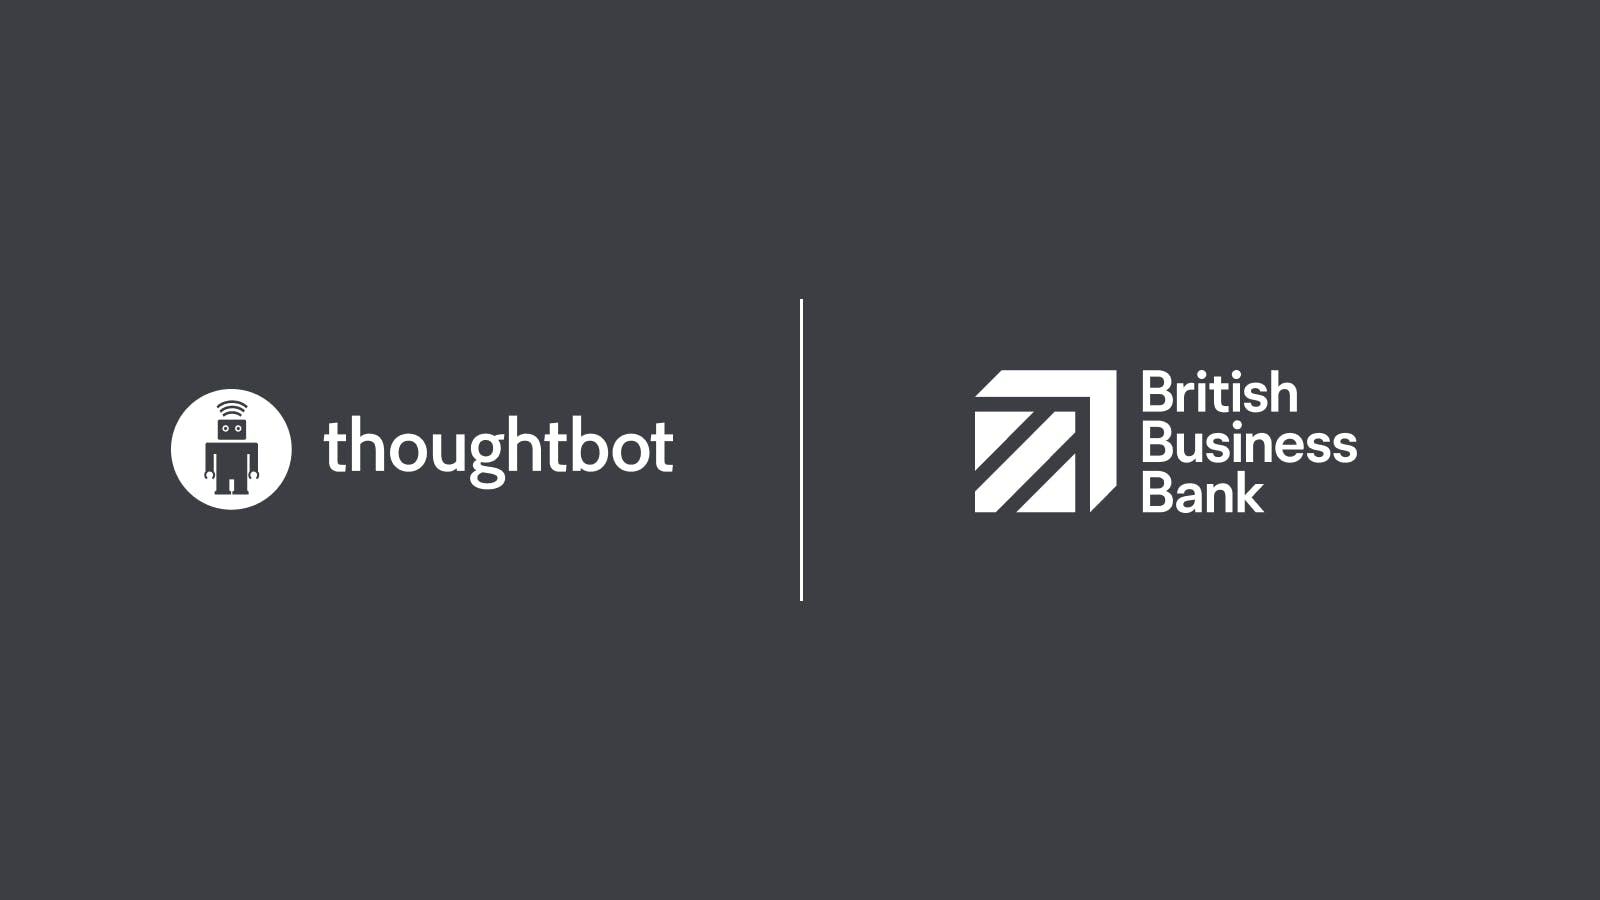 The thoughtbot logo and the British Business Bank logo with a line separating them on a dark background